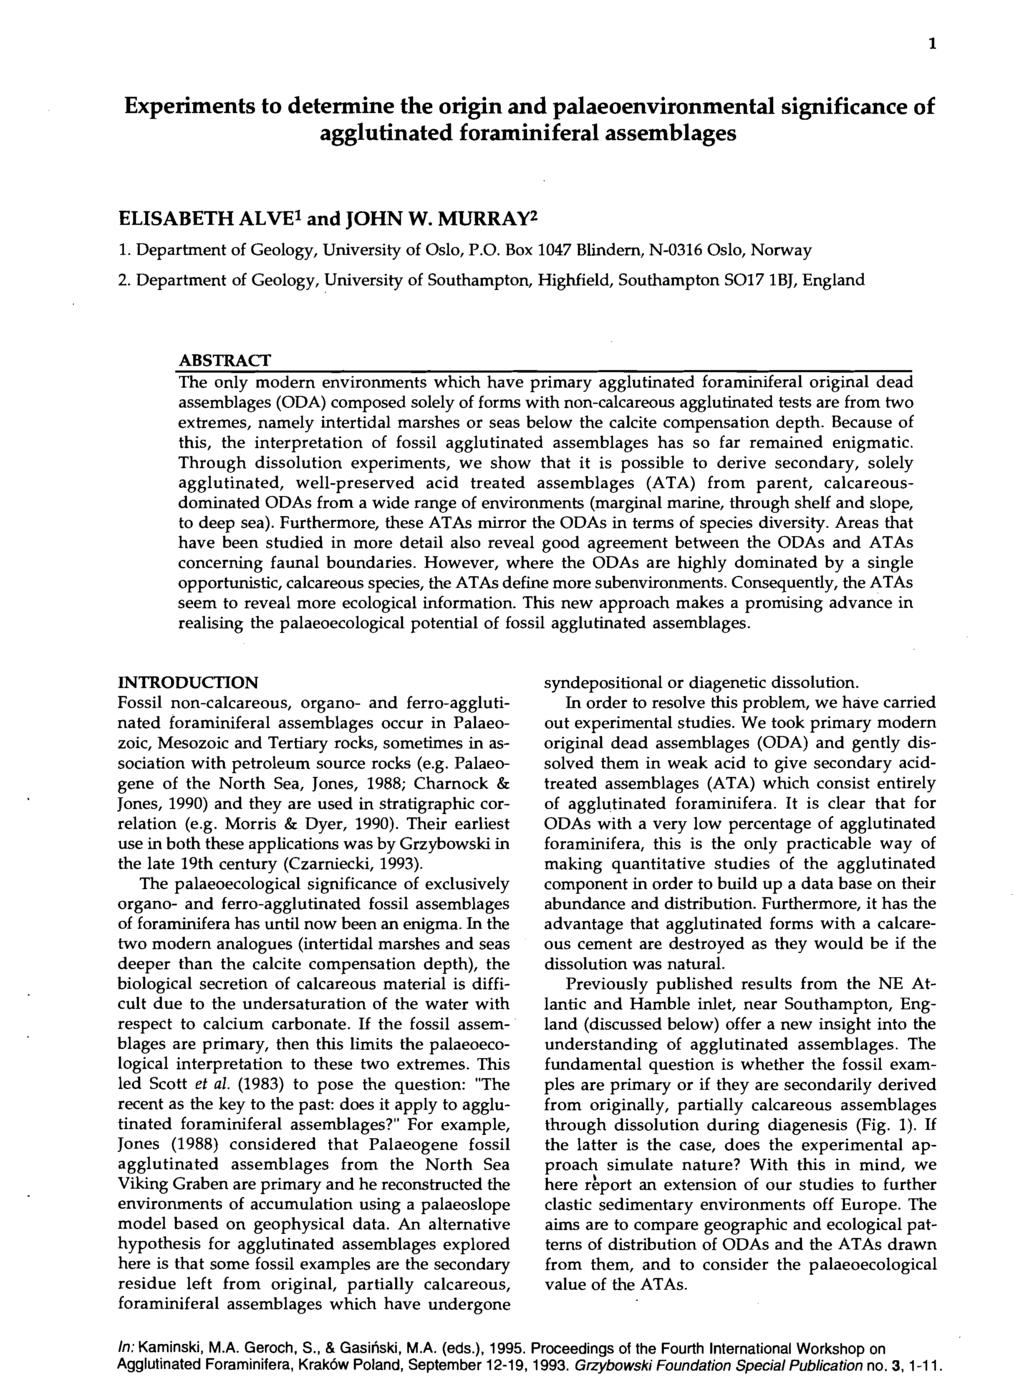 Experiments to determine the origin and palaeoenvironmental significance of agglutinated foraminiferal assemblages ELISABETH ALVEl and JOHN W. MURRAY2 1. Department of Geology, University of Oslo, P.